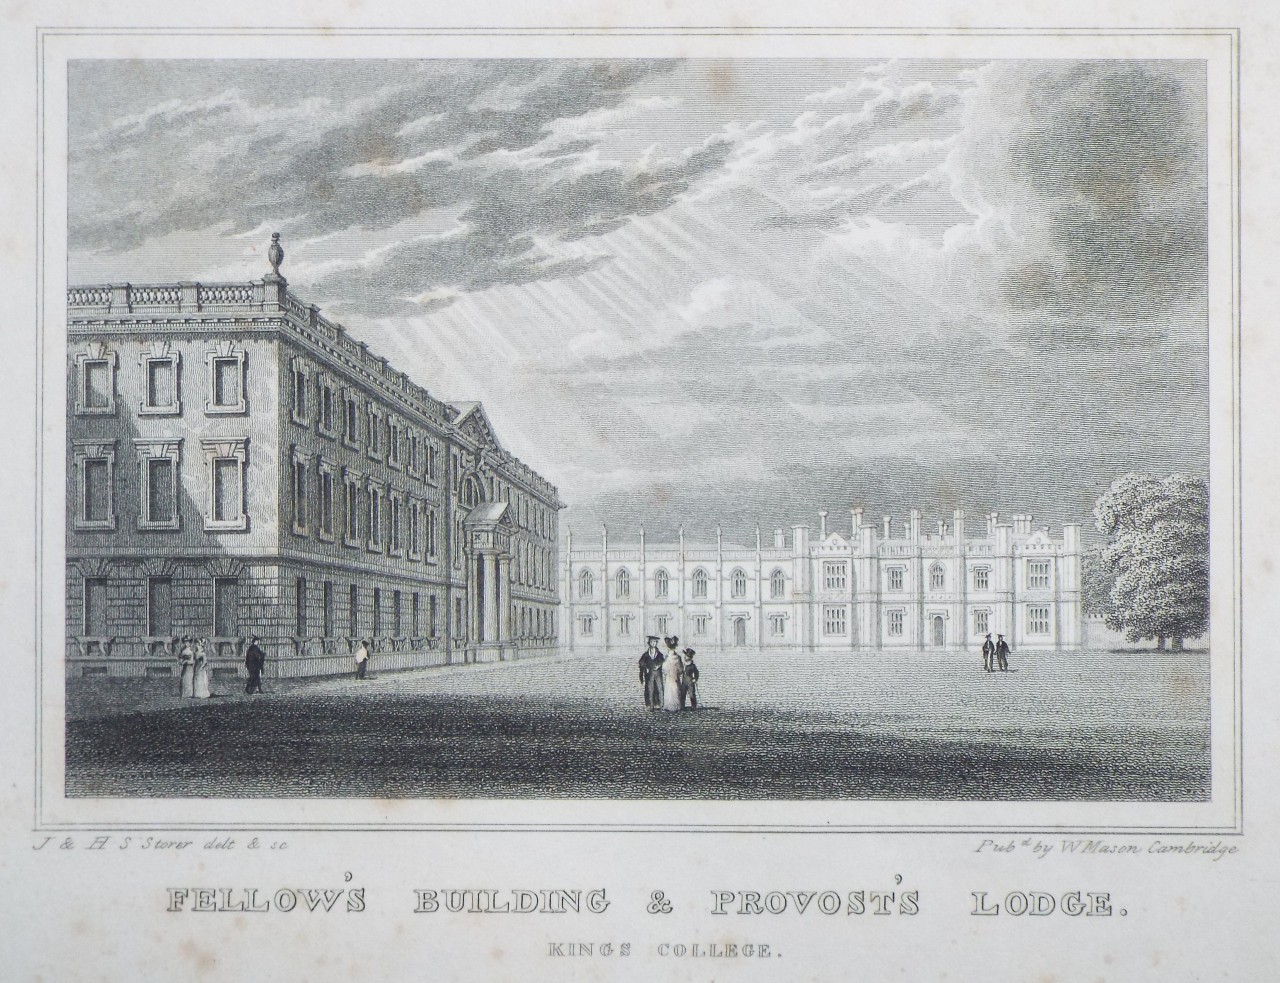 Print - Fellow's Buildings & Provost's Lodge. Kings College. - Storer